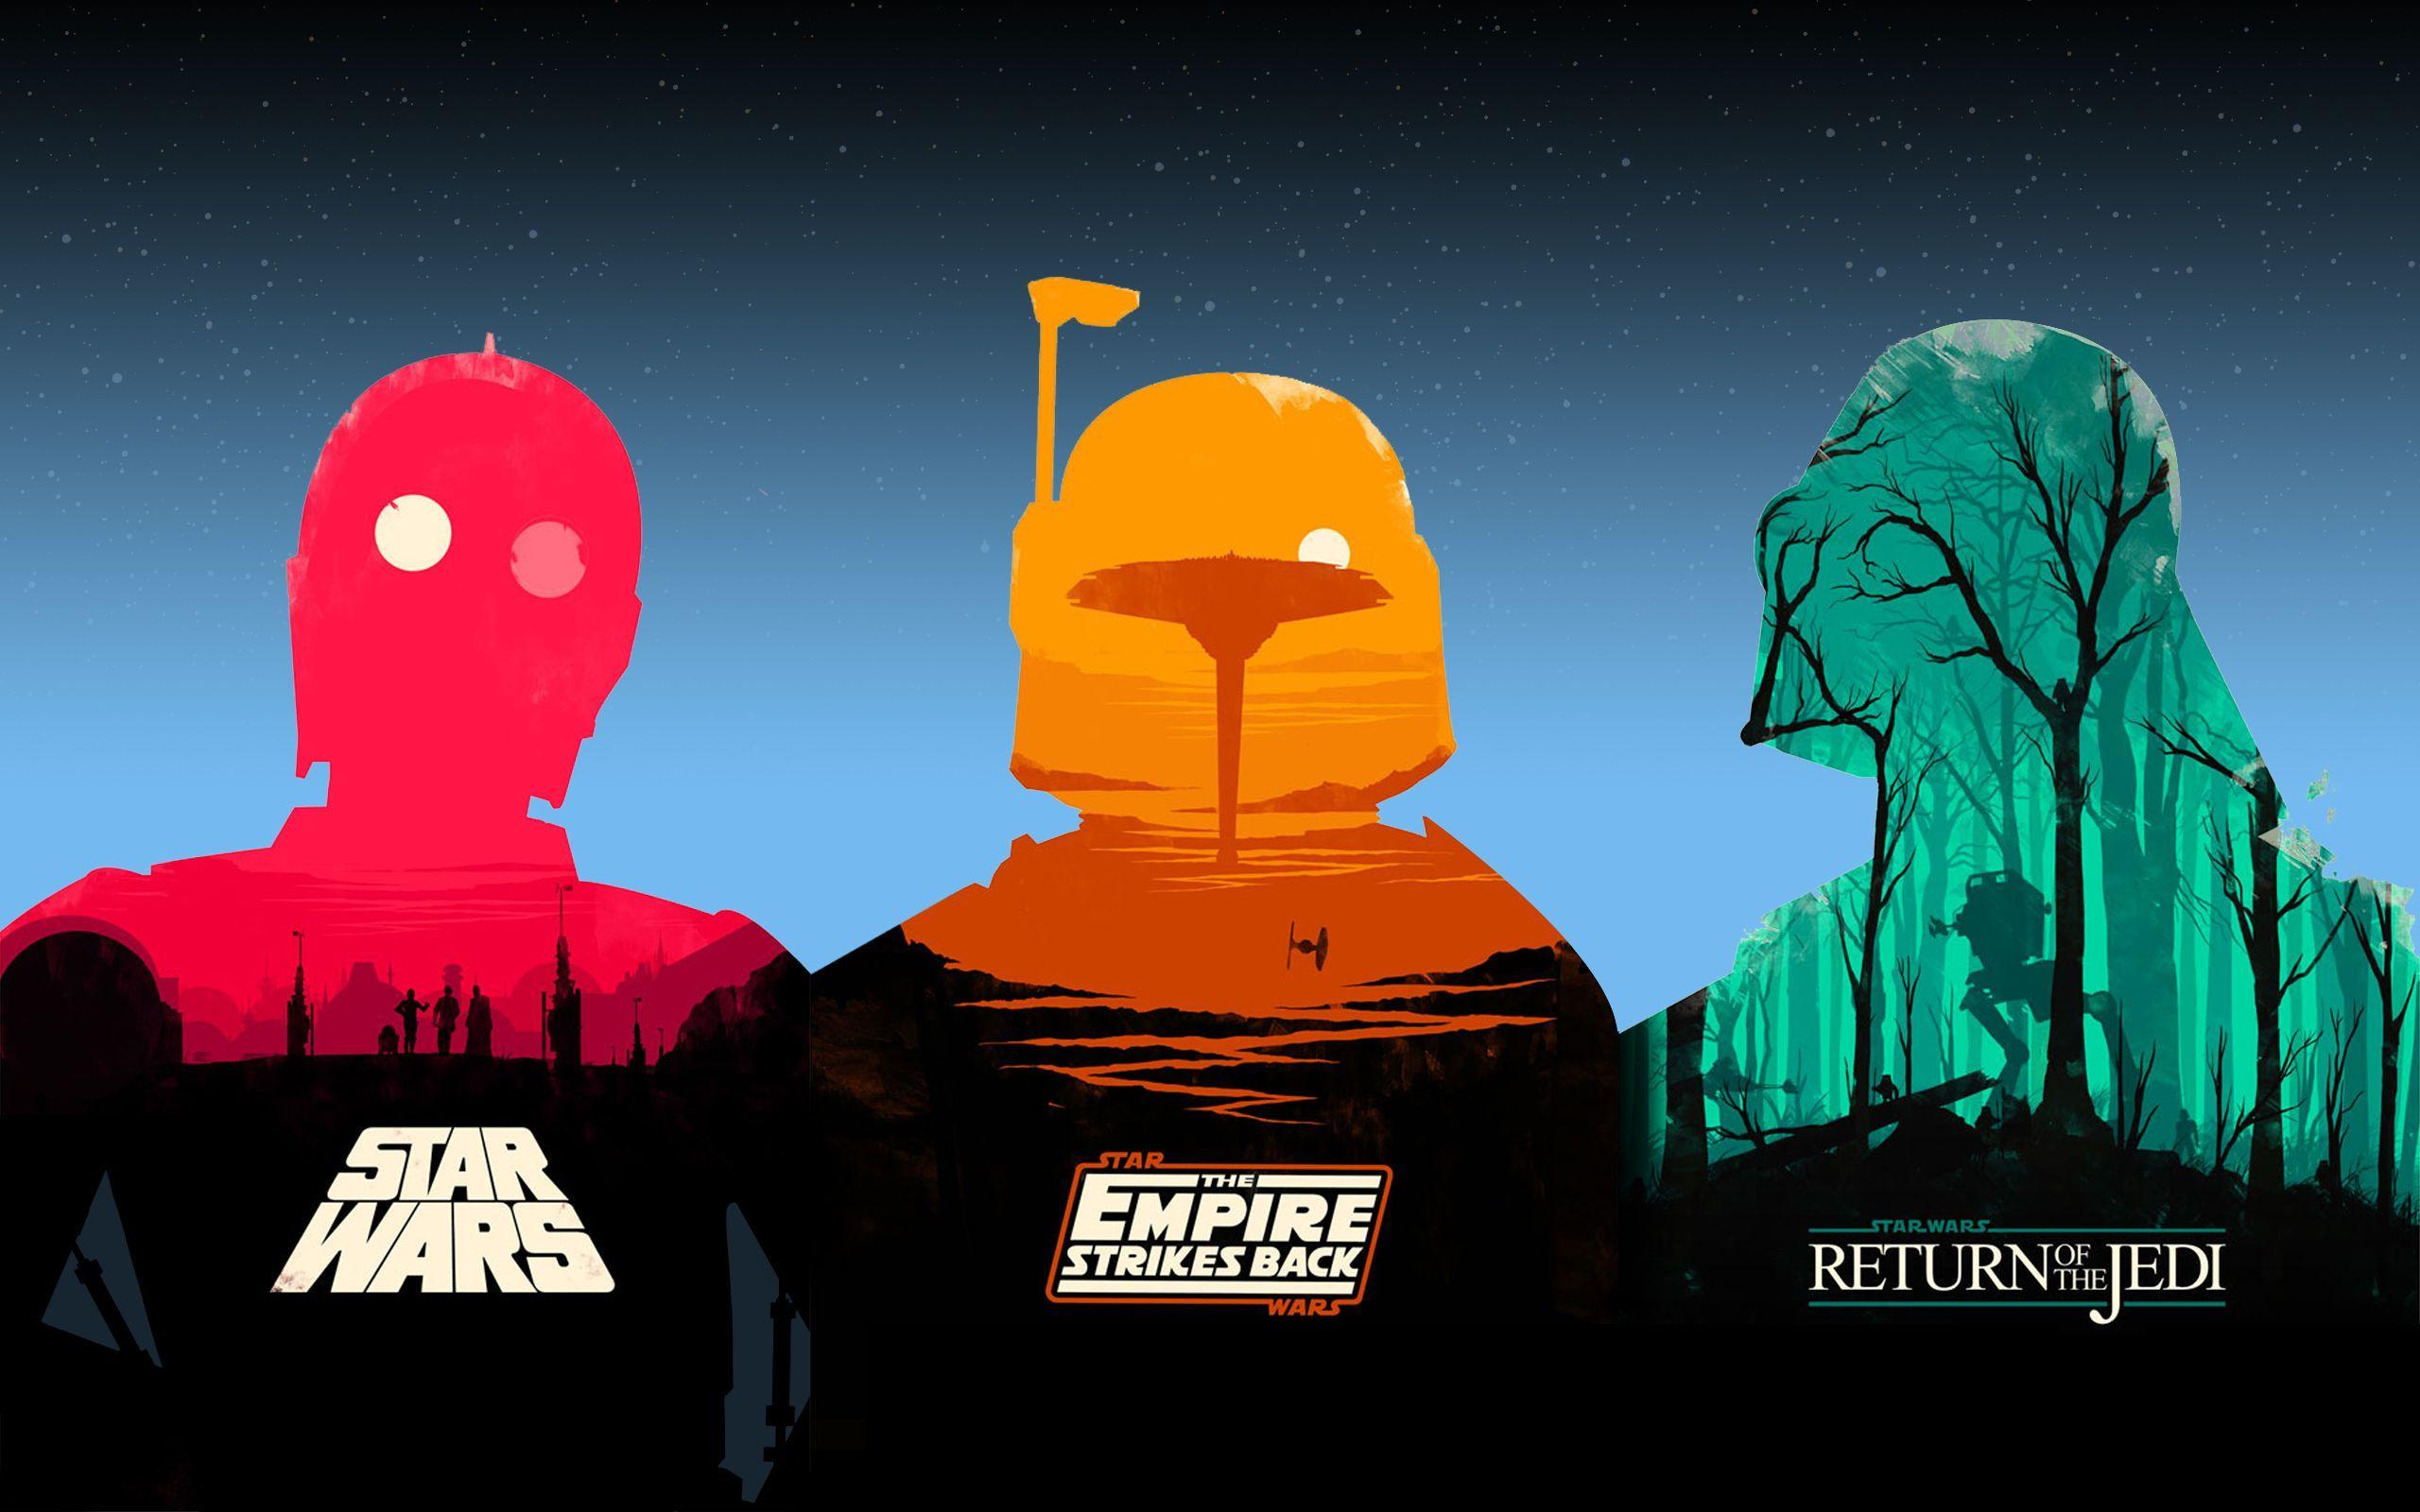 Epic Star Wars Logo - I've compiled Olly Moss' Star Wars posters into one epic wallpaper